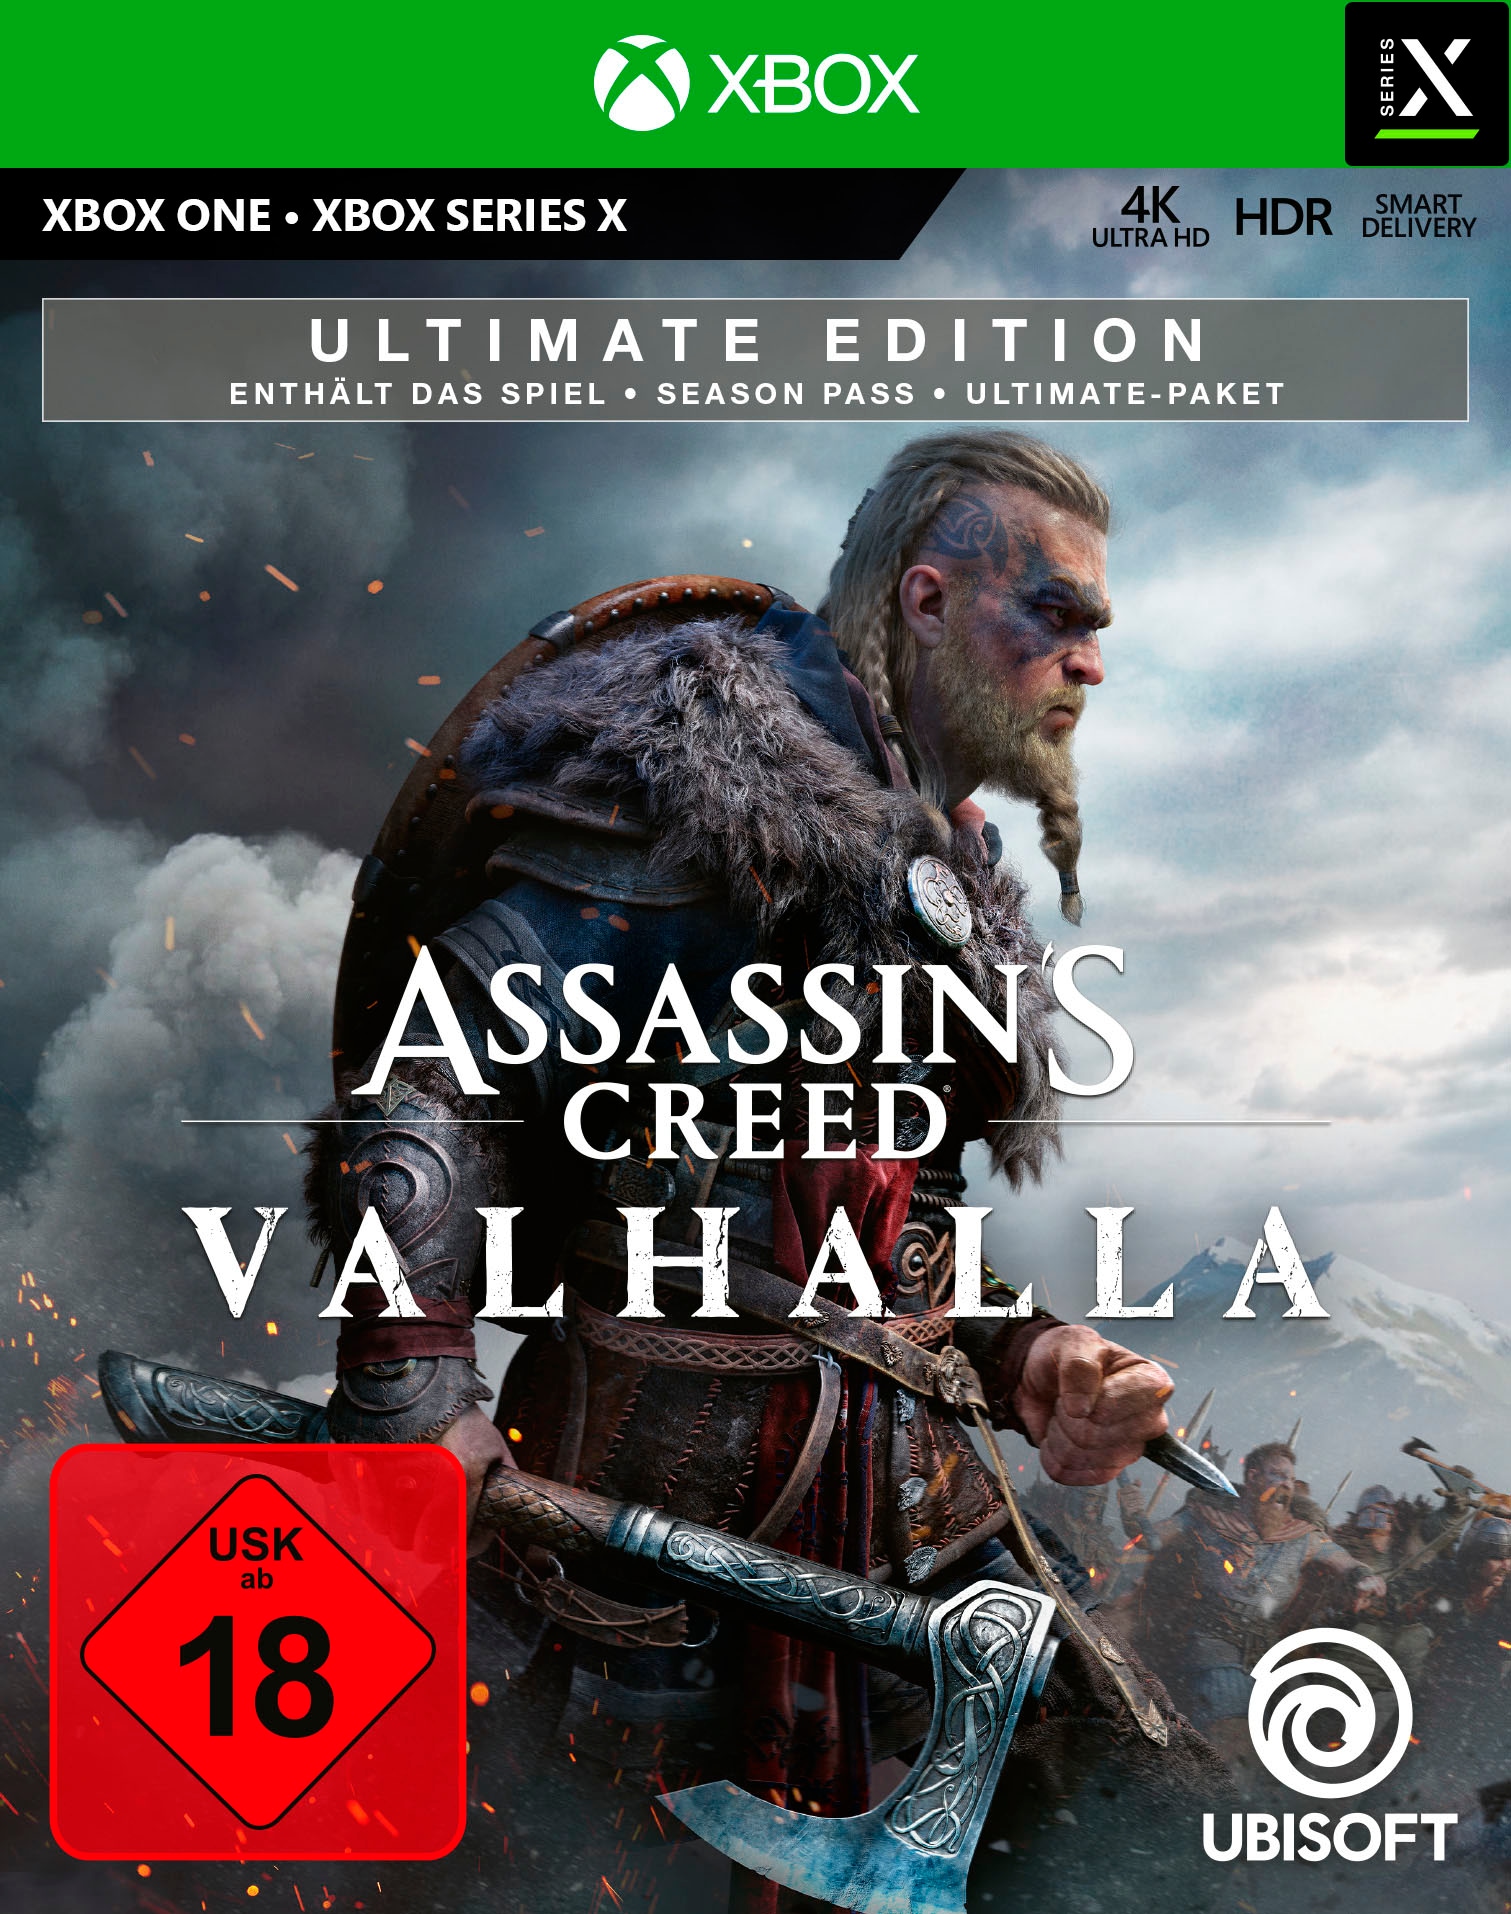 Spielesoftware »Assassin's Creed Valhalla - Ultimate Edition«, Xbox One